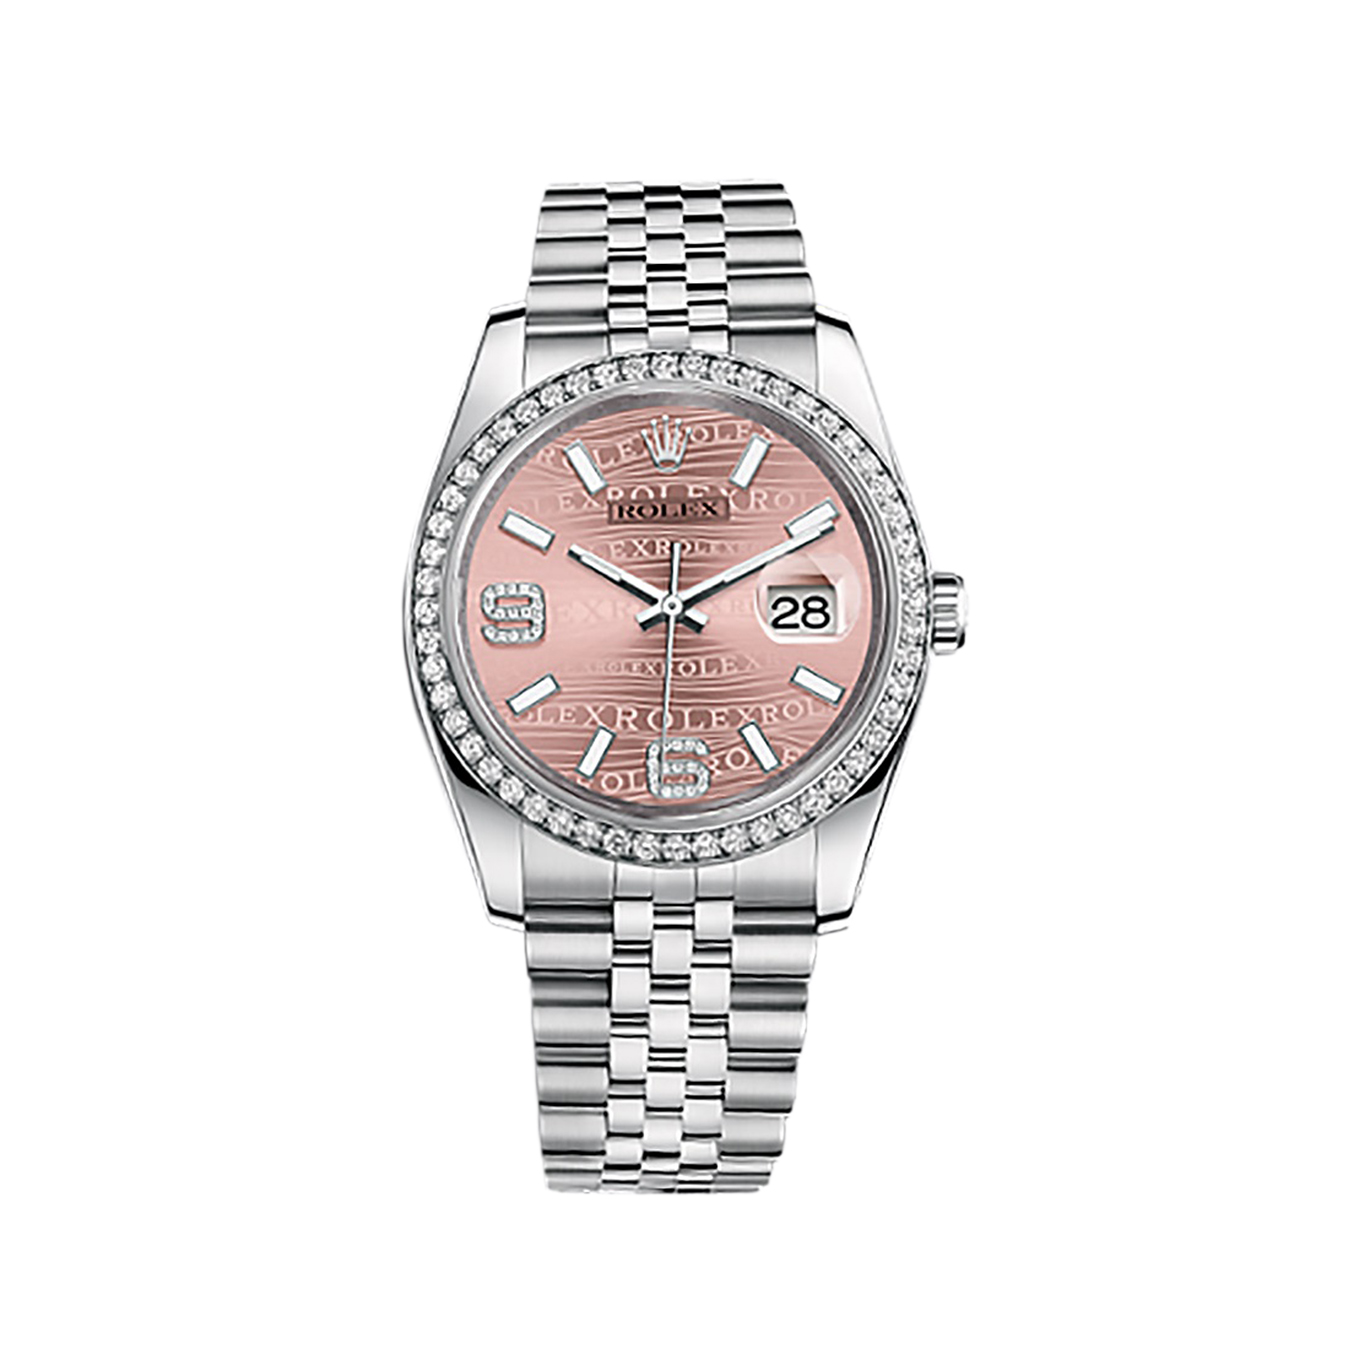 Datejust 36 116244 White Gold & Stainless Steel Watch (Pink Waves Set with Diamonds)